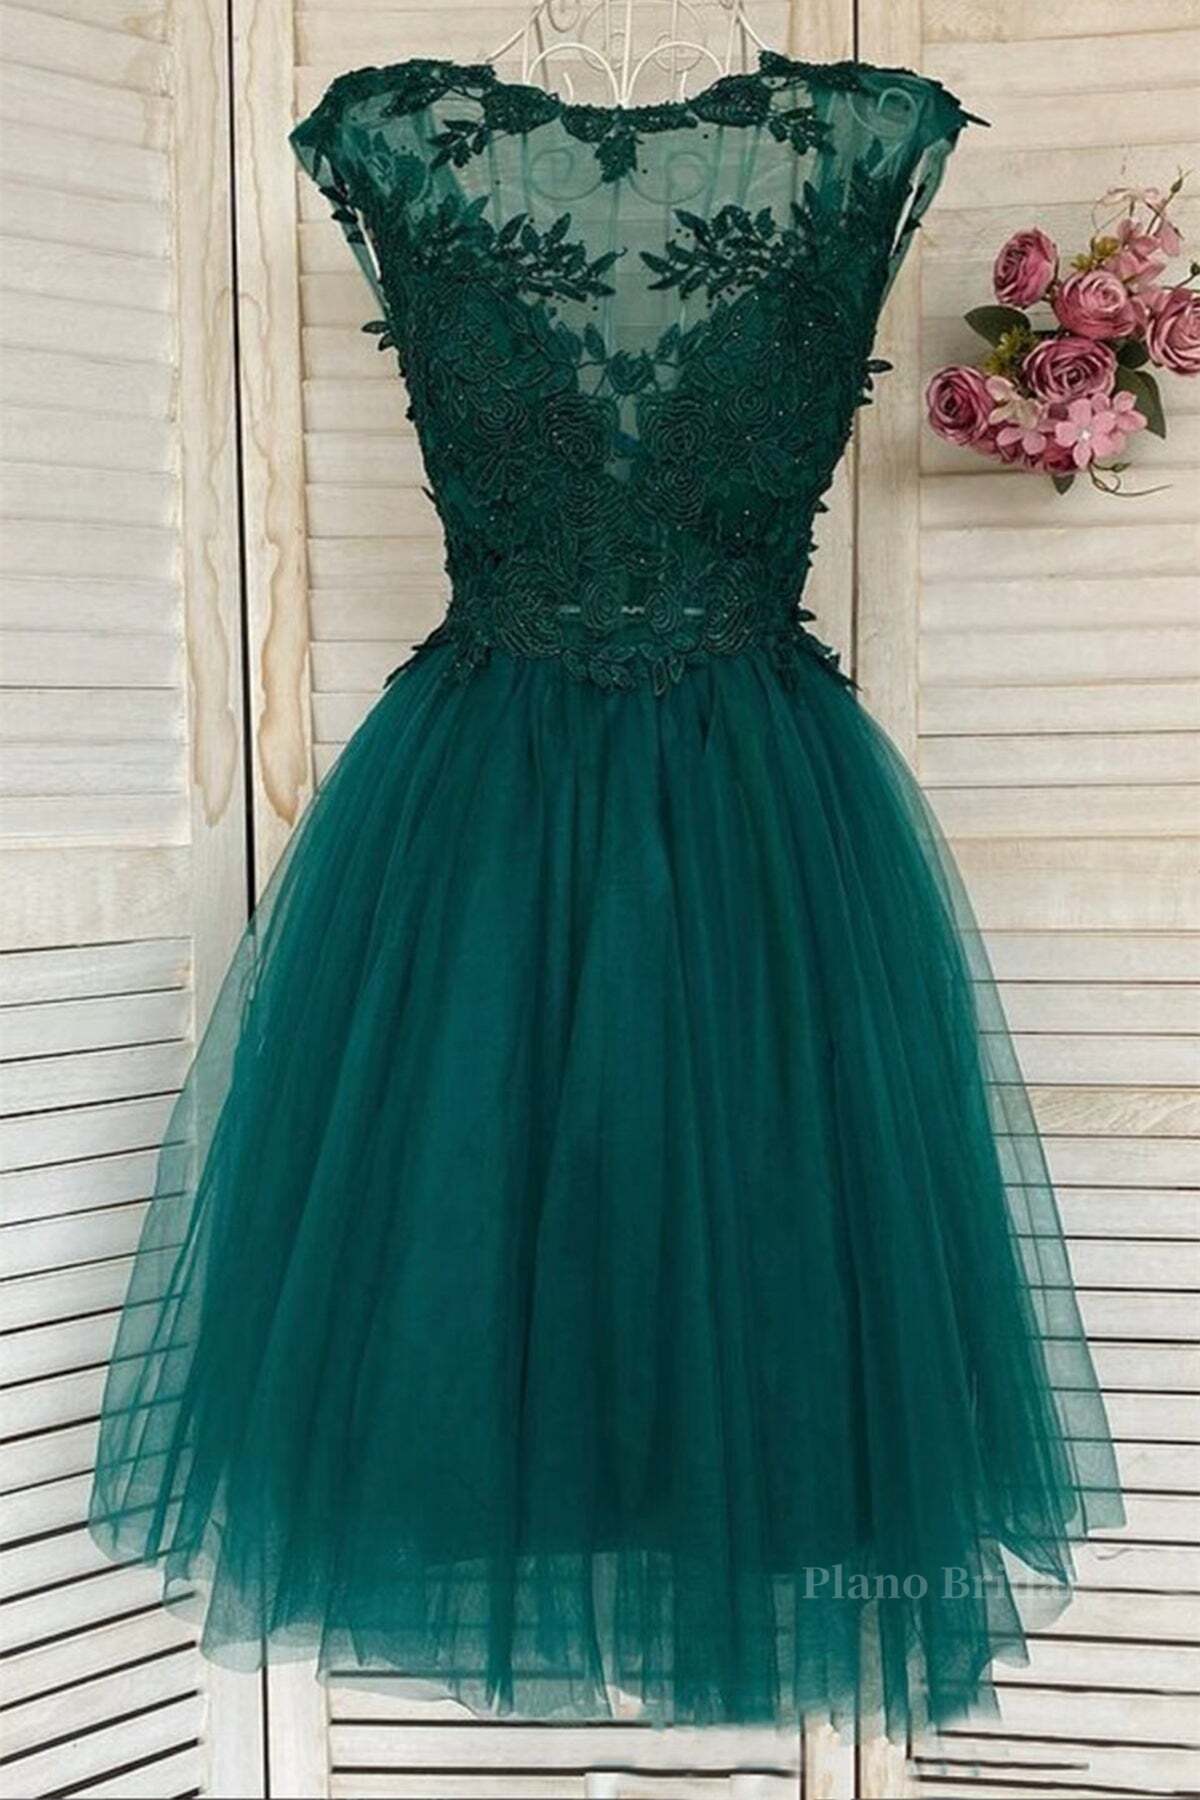 Green Lace Tulle Short Prom Homecoming Dresses, Green Lace Formal Graduation Evening Dresses